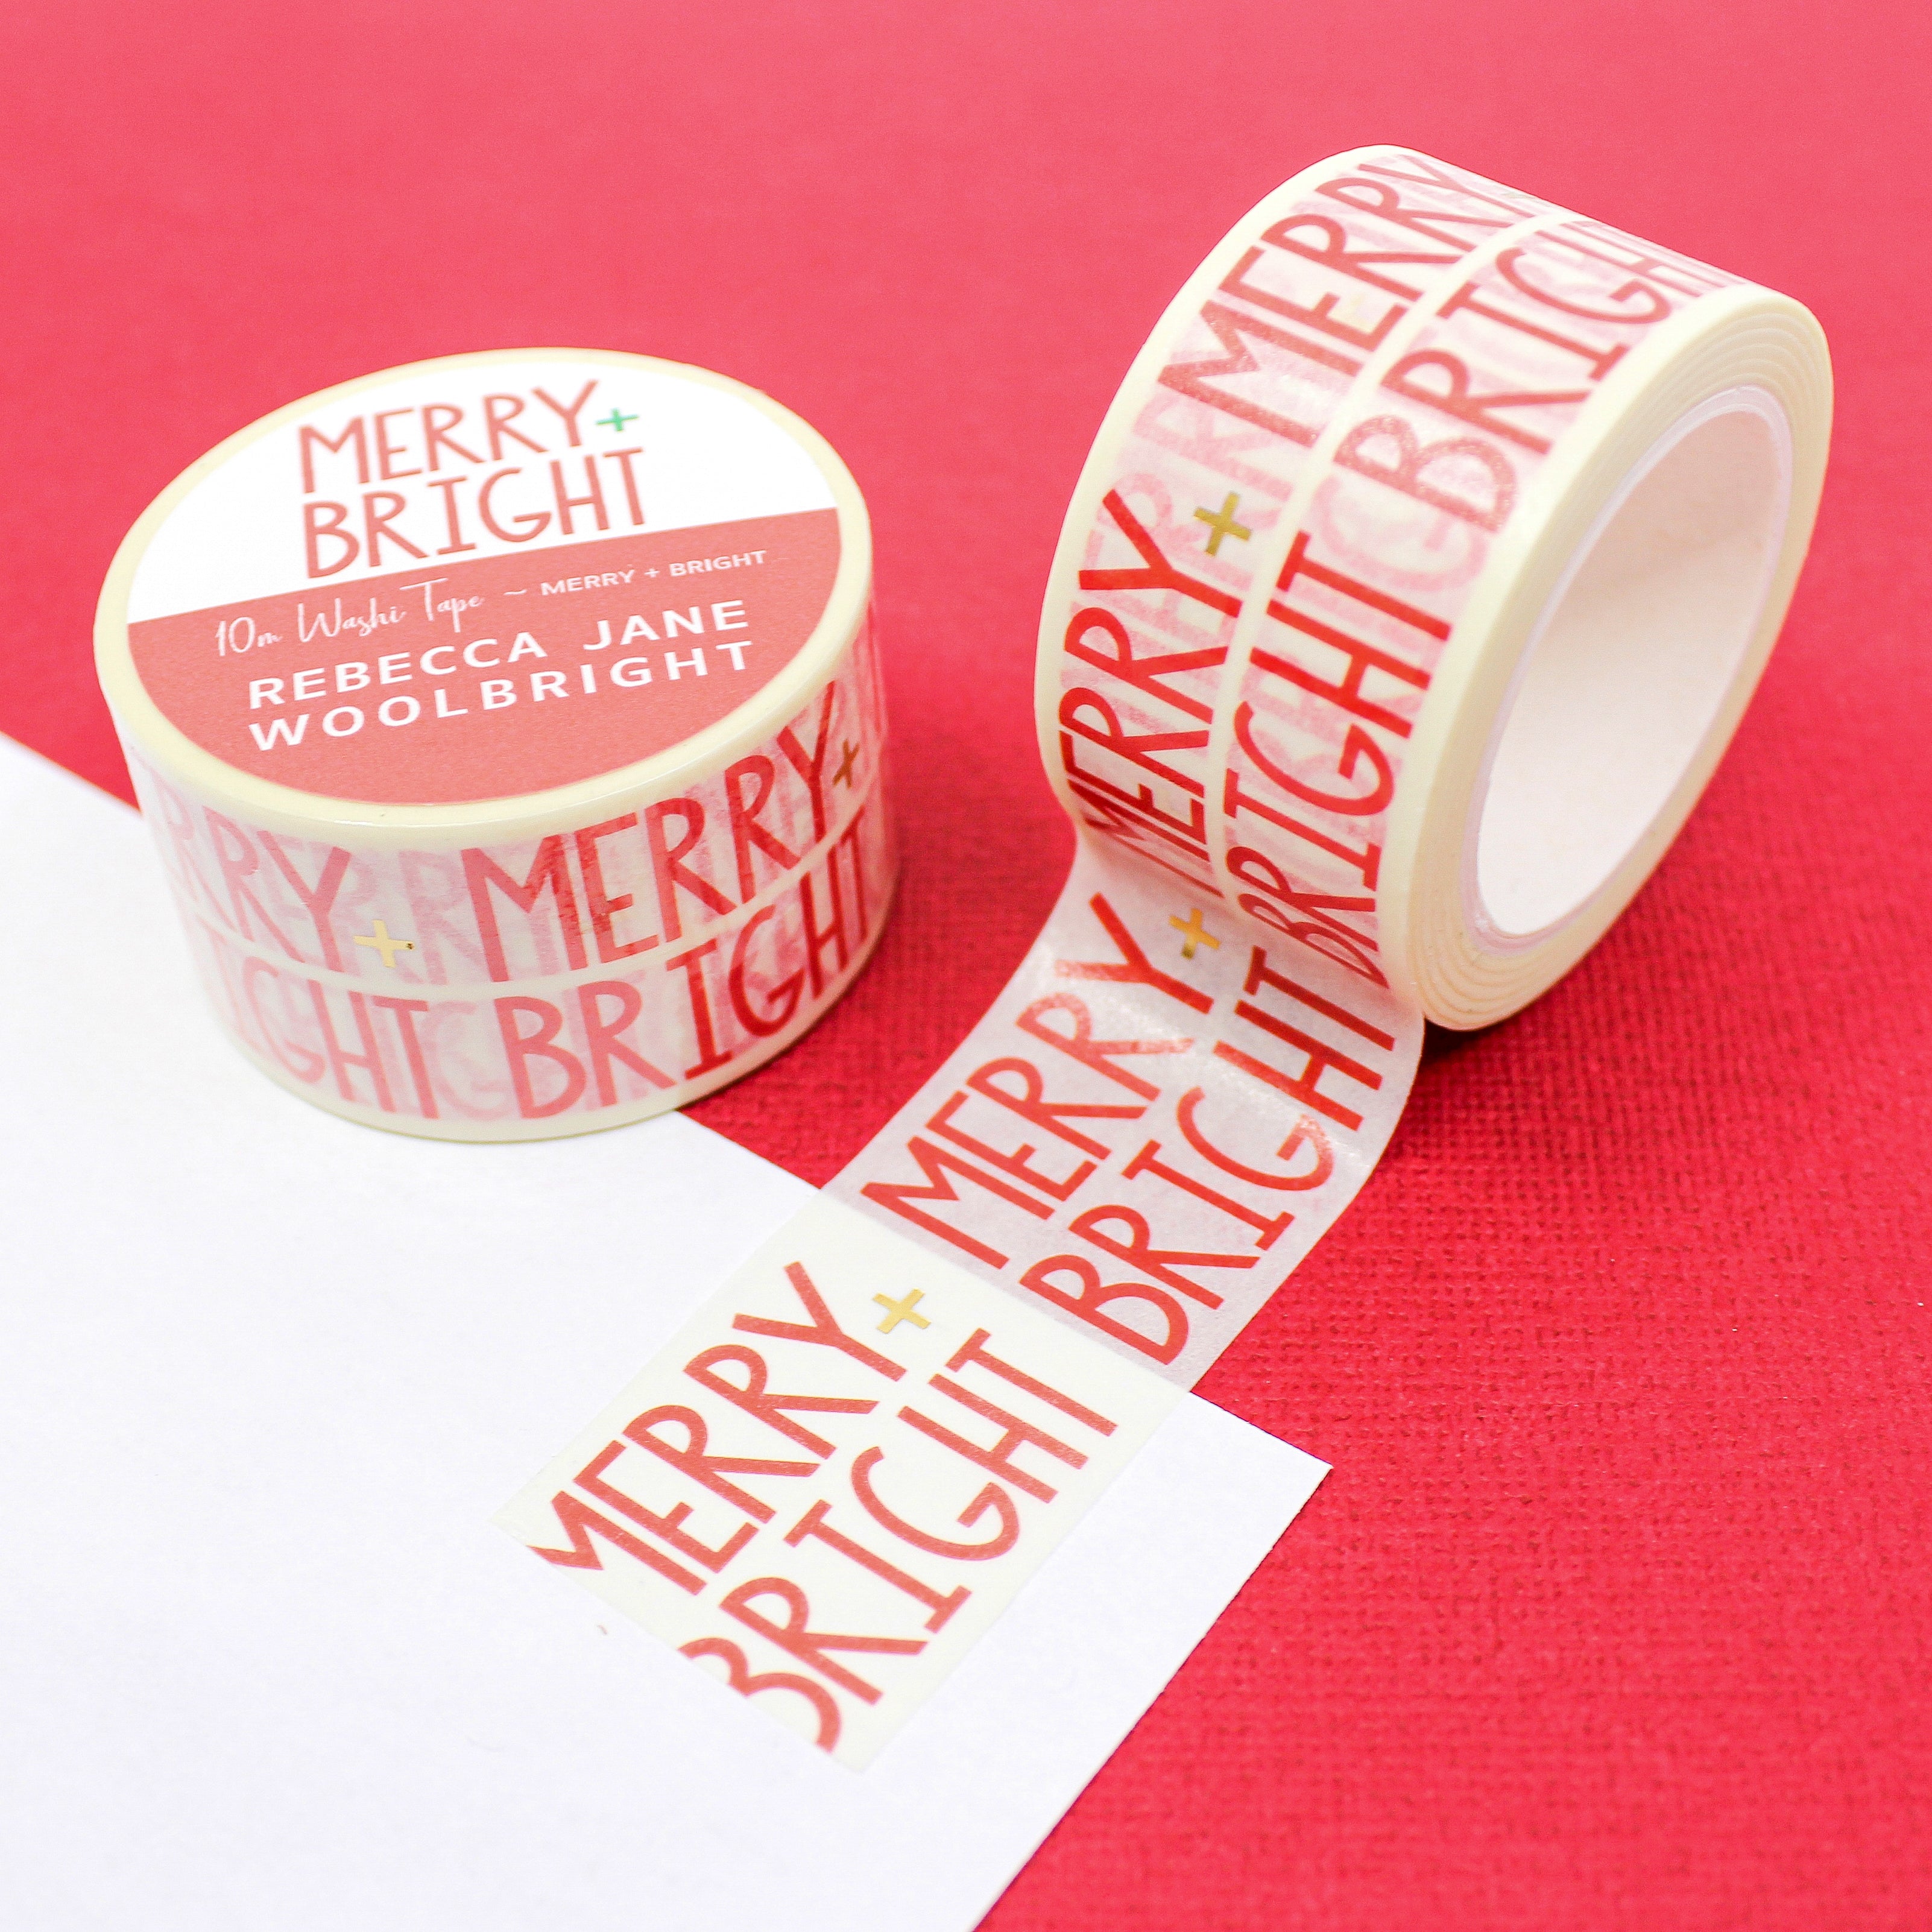 This is a red merry and bright view themed washi tape from BBB Supplies Craft Shop